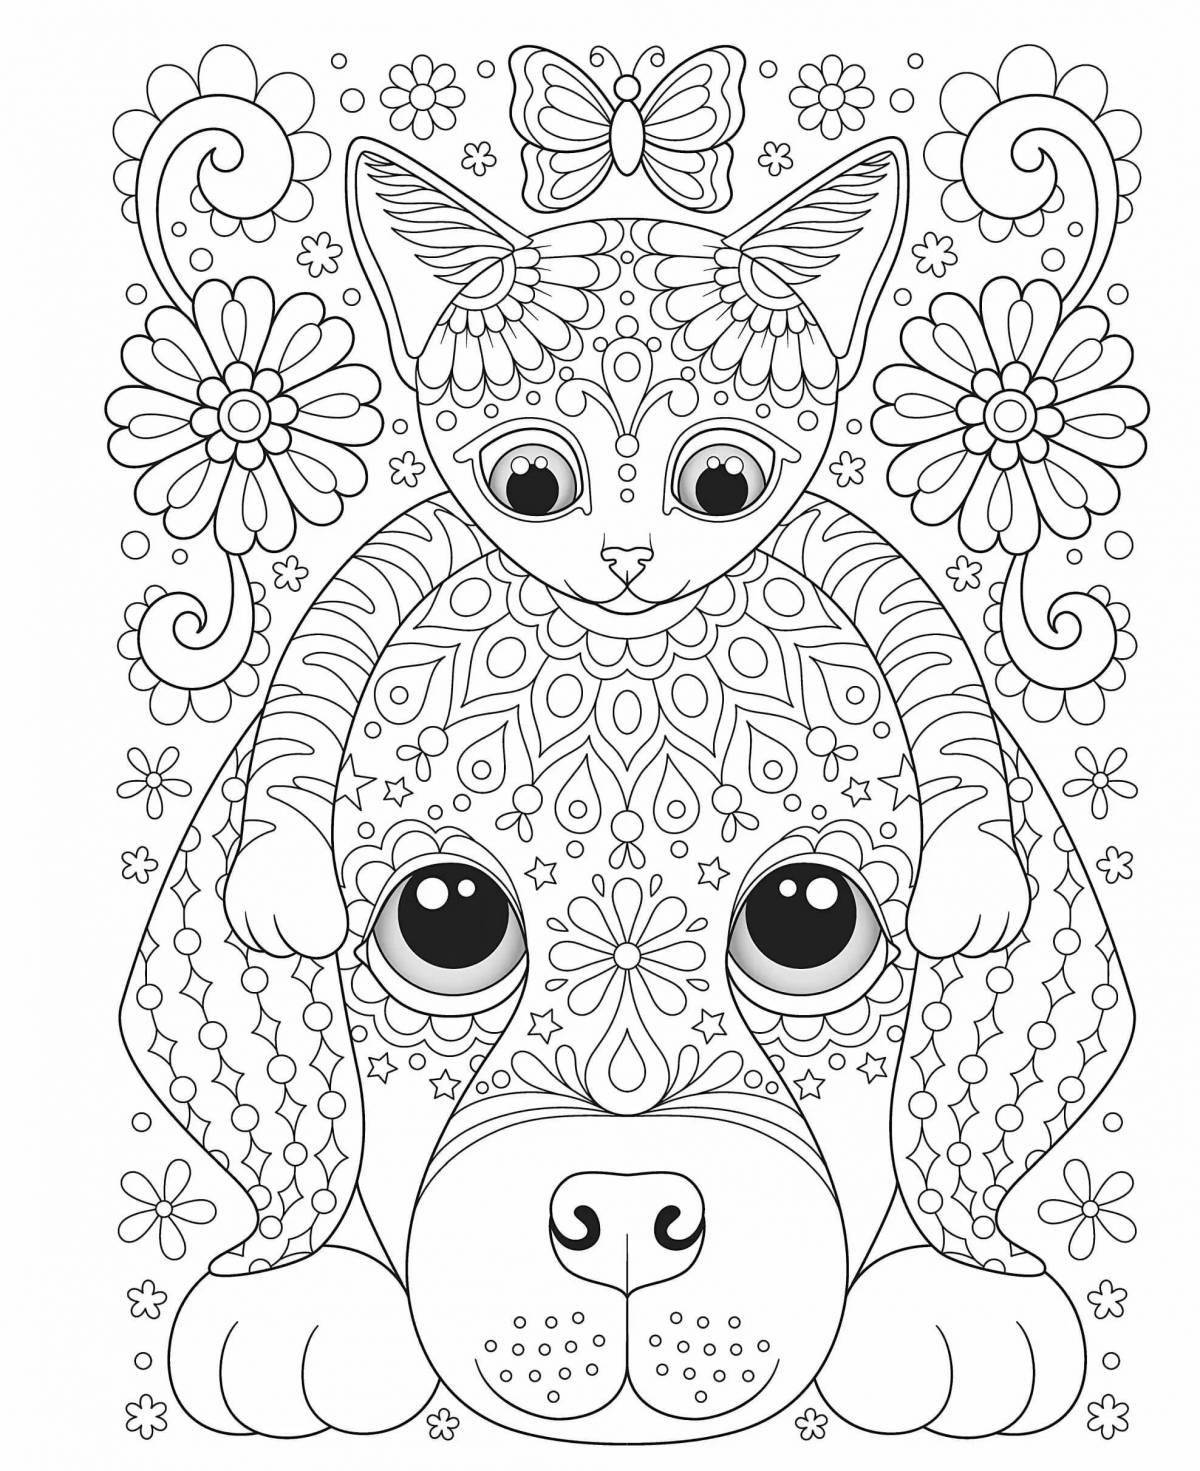 Relaxing coloring book antistress baby